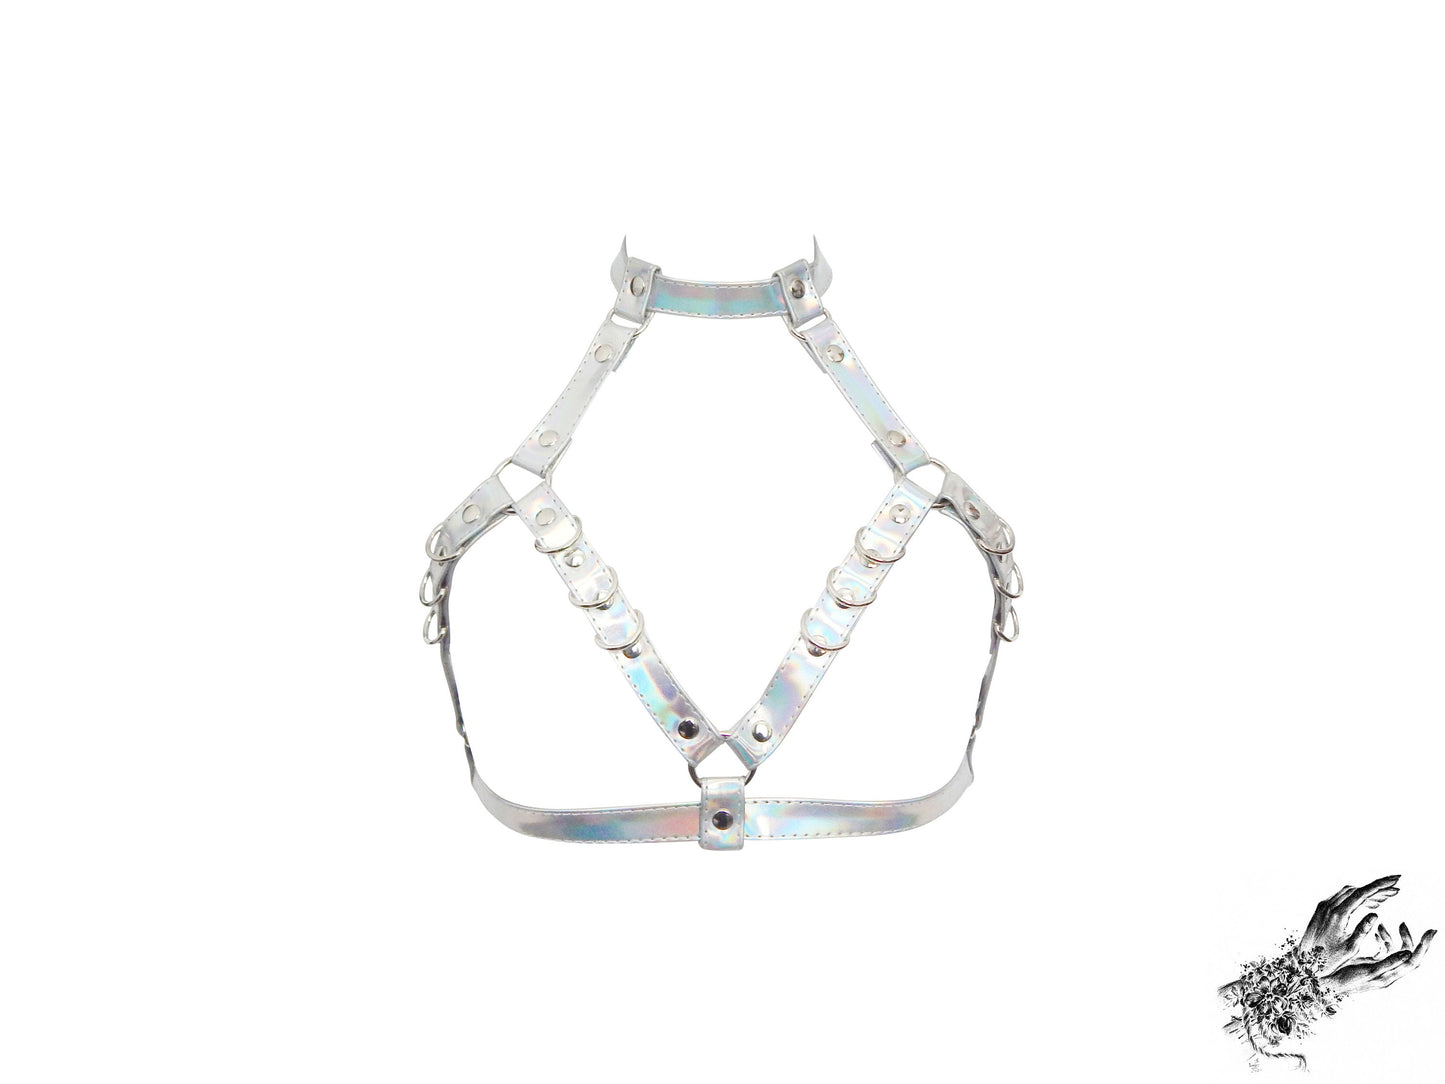 Holographic Silver D Ring Harness Bra